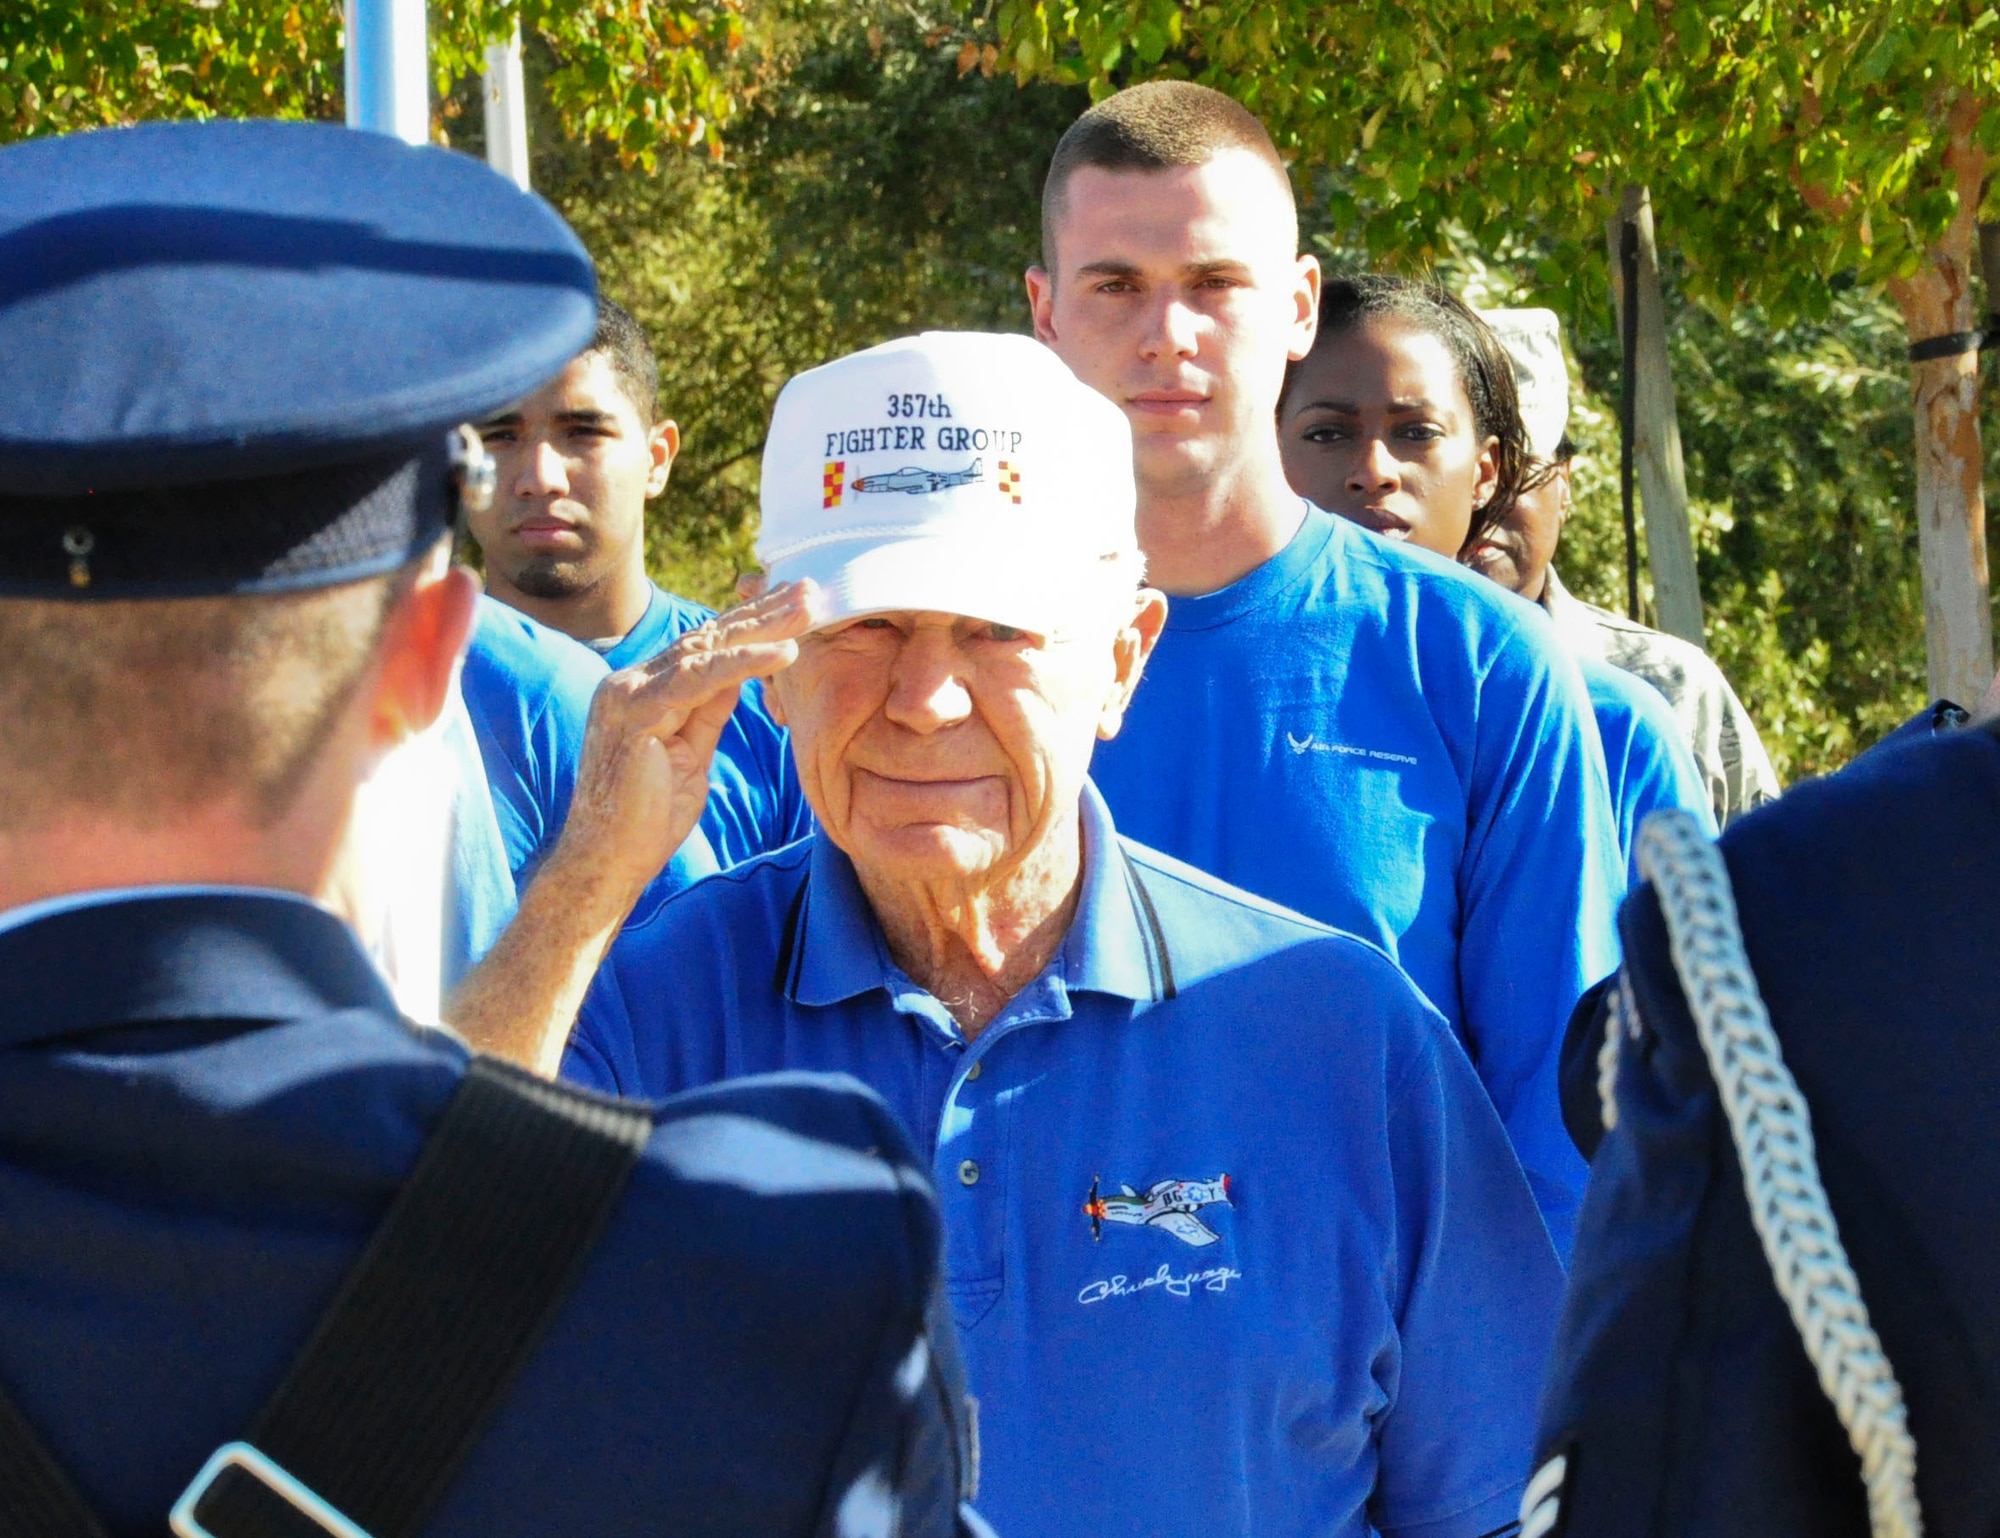 Maj. Gen. (ret) Charles "Chuck" Yeager salutes the flag during the national anthem before administering the oath of enlistment to future members of the Air Force Reserve Oct. 8 at Beale Air Force Base, Calif. Yeager was the first man to break the sound barrier in 1947. After administering the oath of enlistment he offered advice to the future Airmen as they begin or continue their careers as Reservists. (U.S. Air Force photo by Tech. Sgt. Eric Petosky/Released)